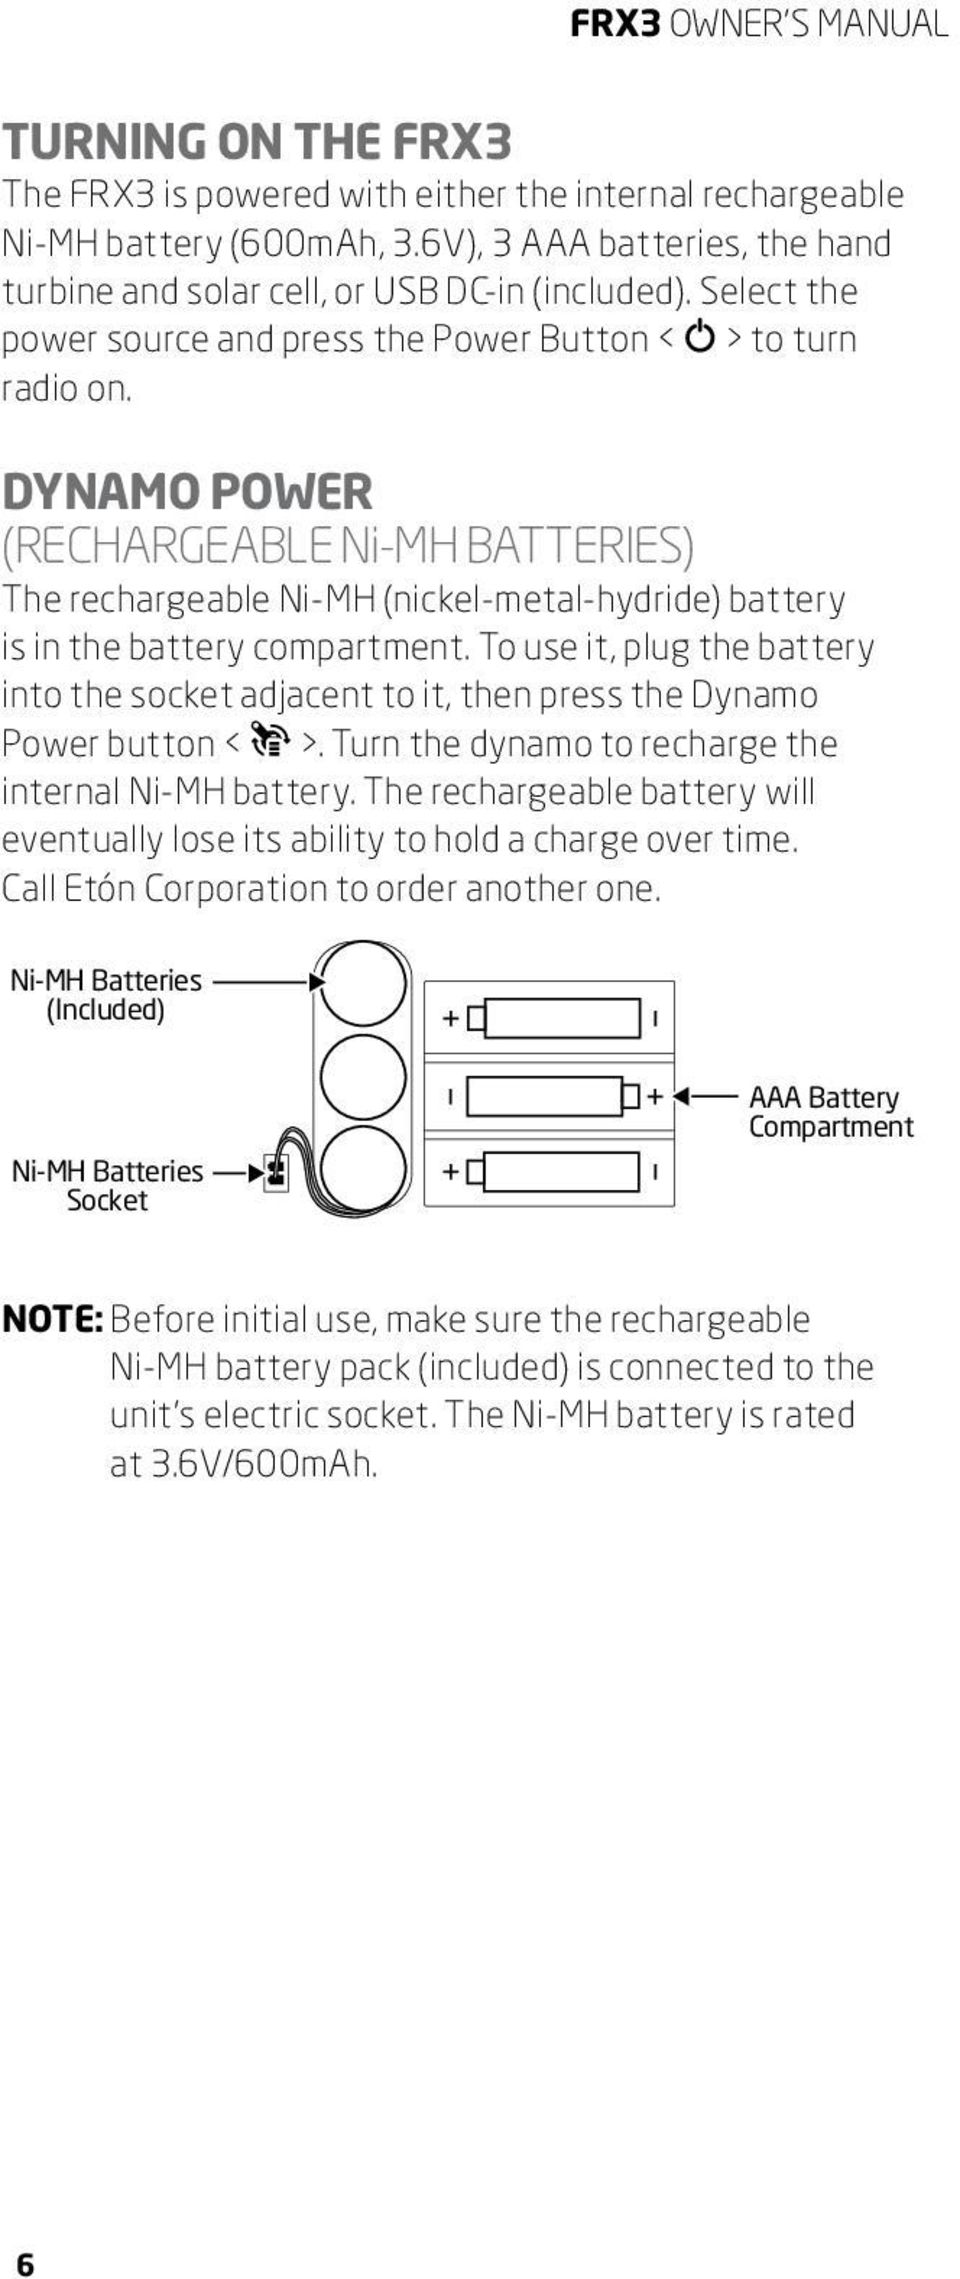 Dynamo power (Rechargeable Ni-MH Batteries) The rechargeable Ni-MH (nickel-metal-hydride) battery is in the battery compartment.